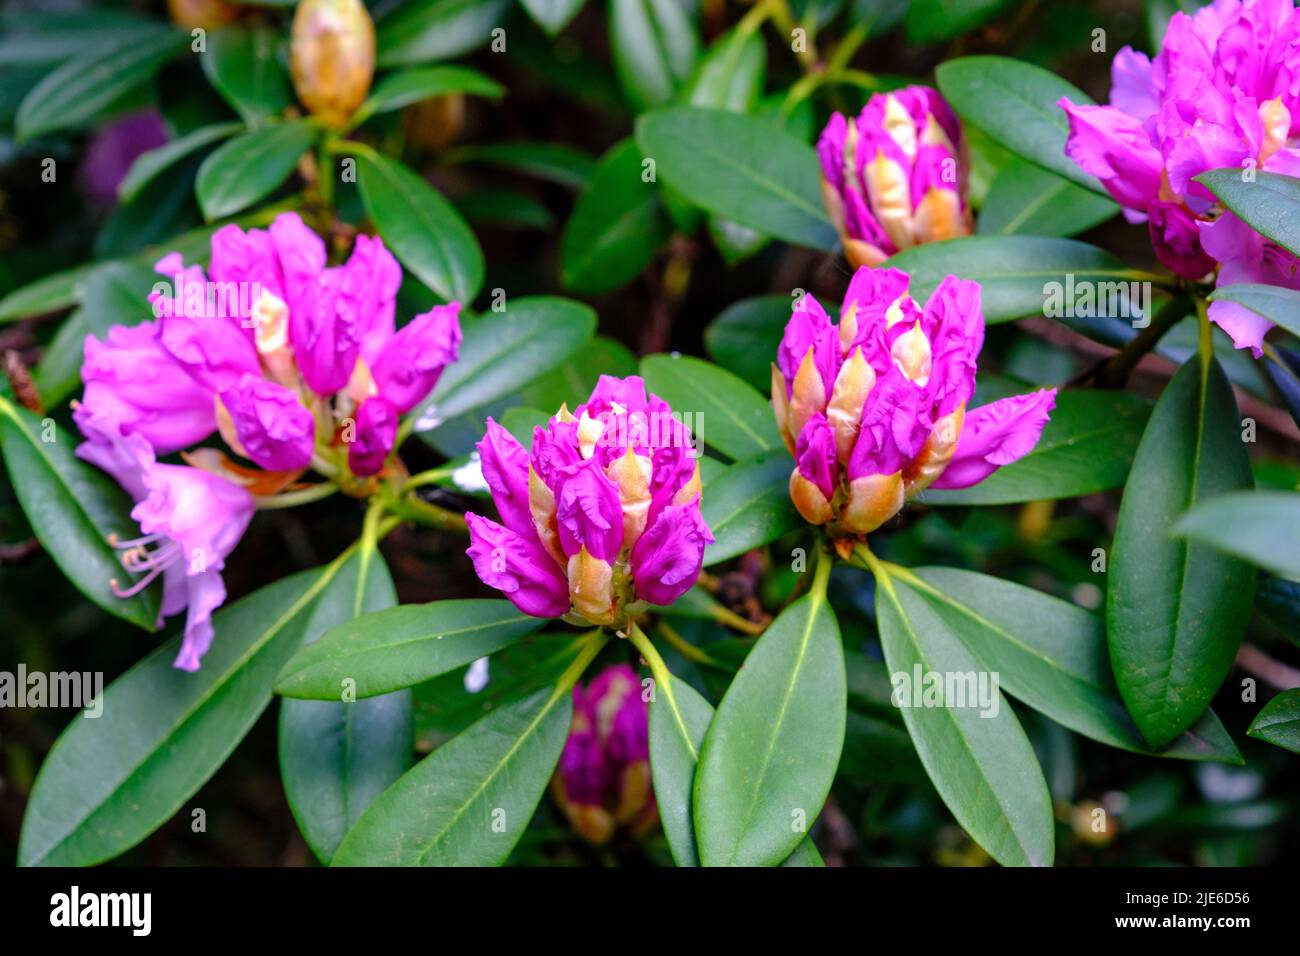 Purple rhododendron buds and flowers in spring in UK garden Stock Photo